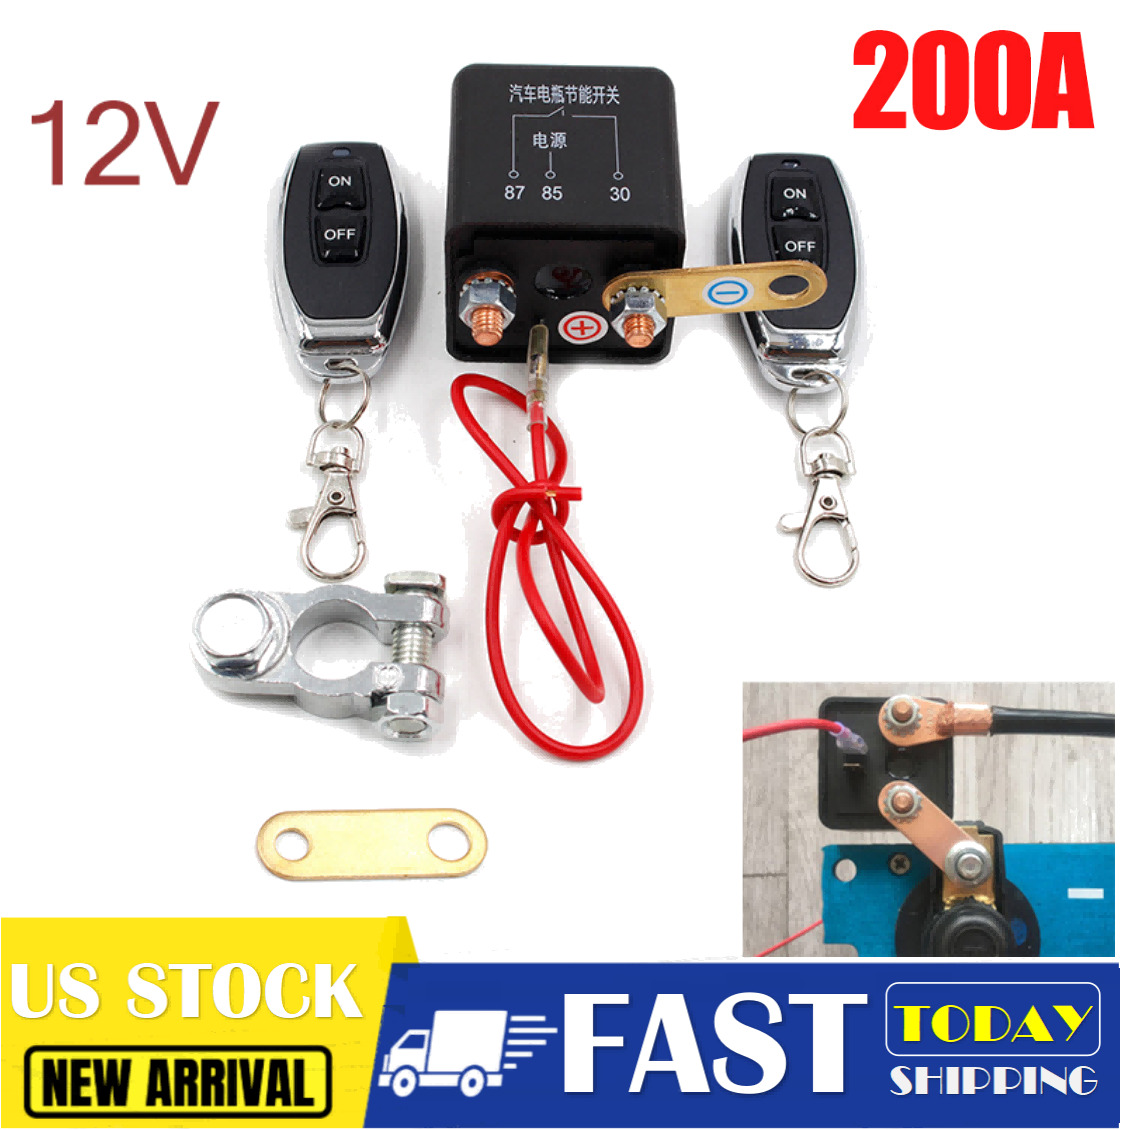 12V 200A Universal Car Battery Remote Control Breaker Switch Power Start Relay